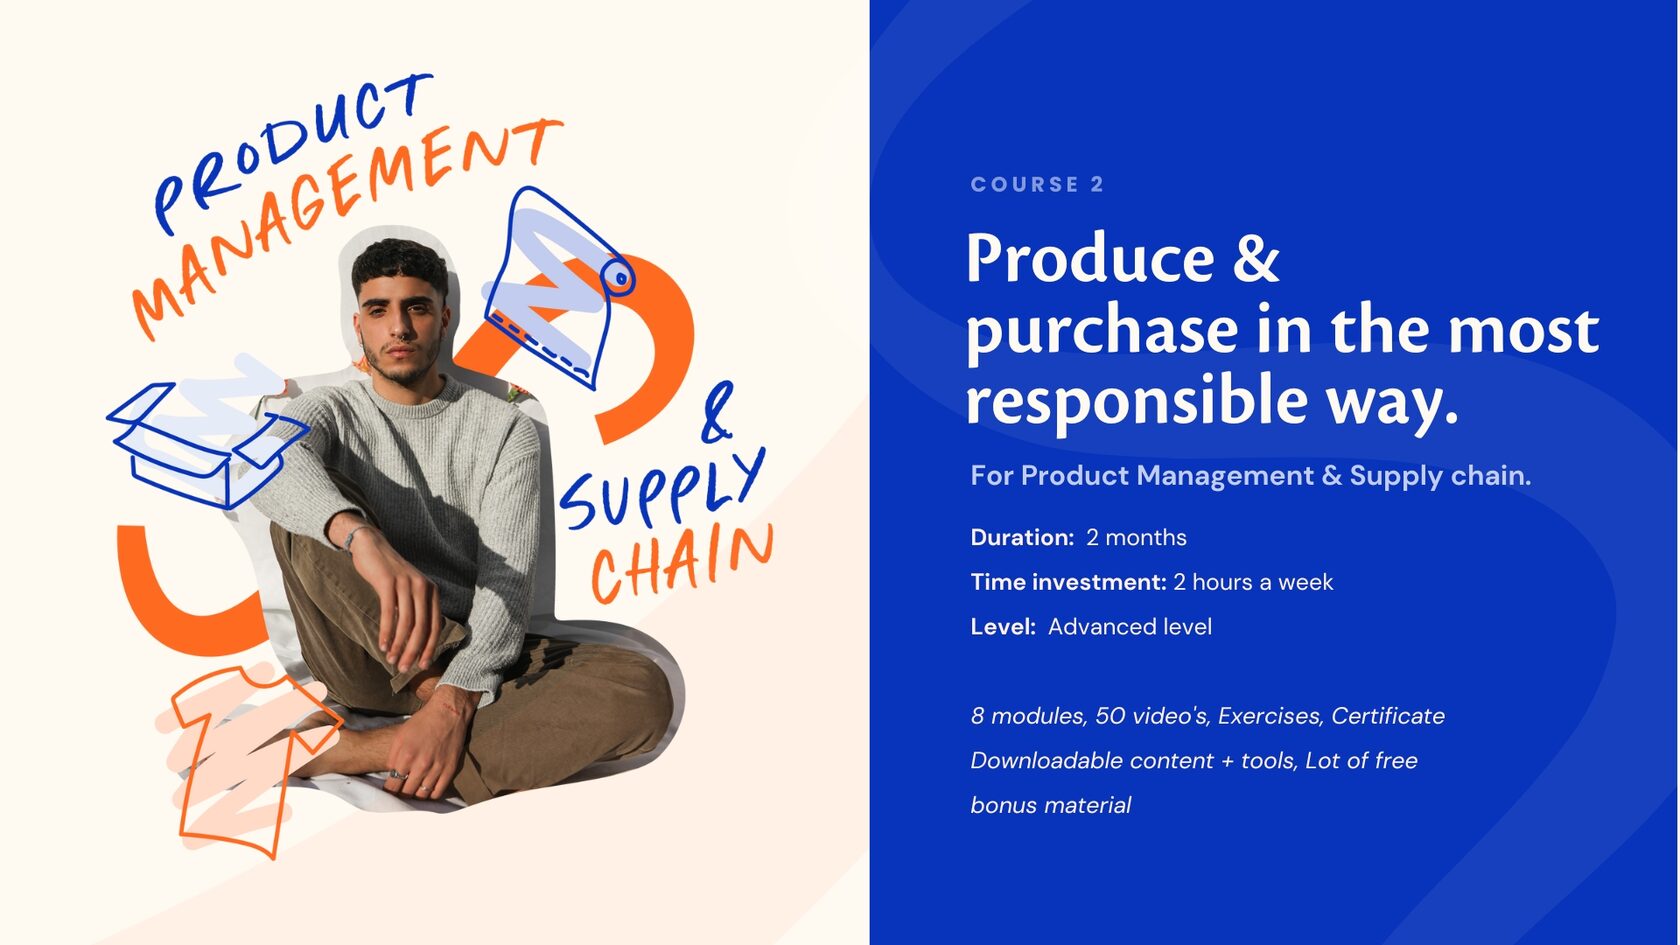 Product Management & Supply chain